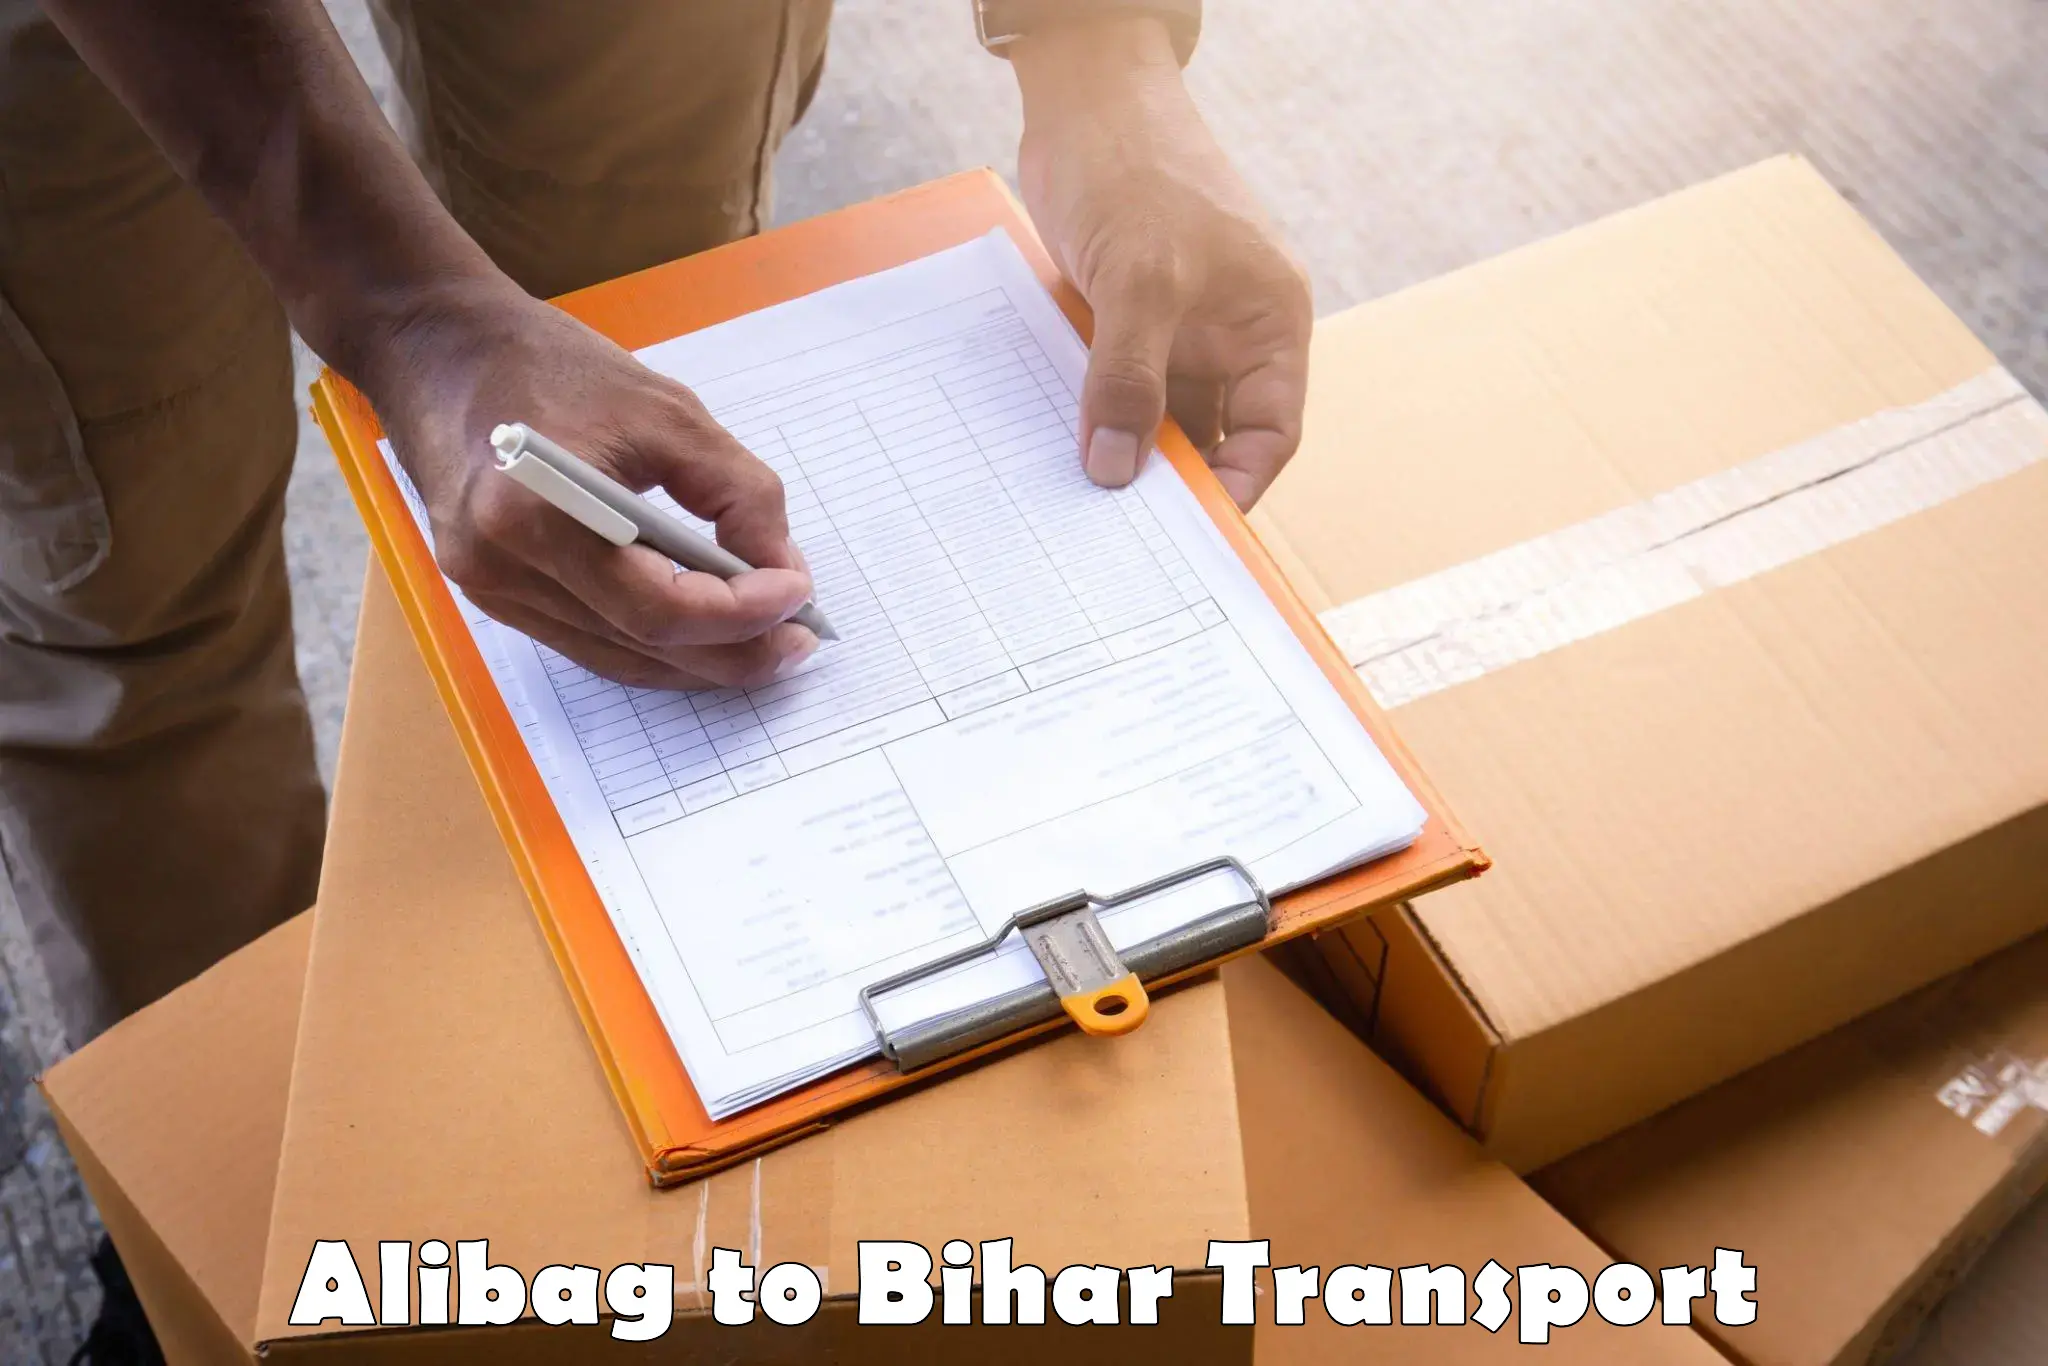 Truck transport companies in India Alibag to Madanpur